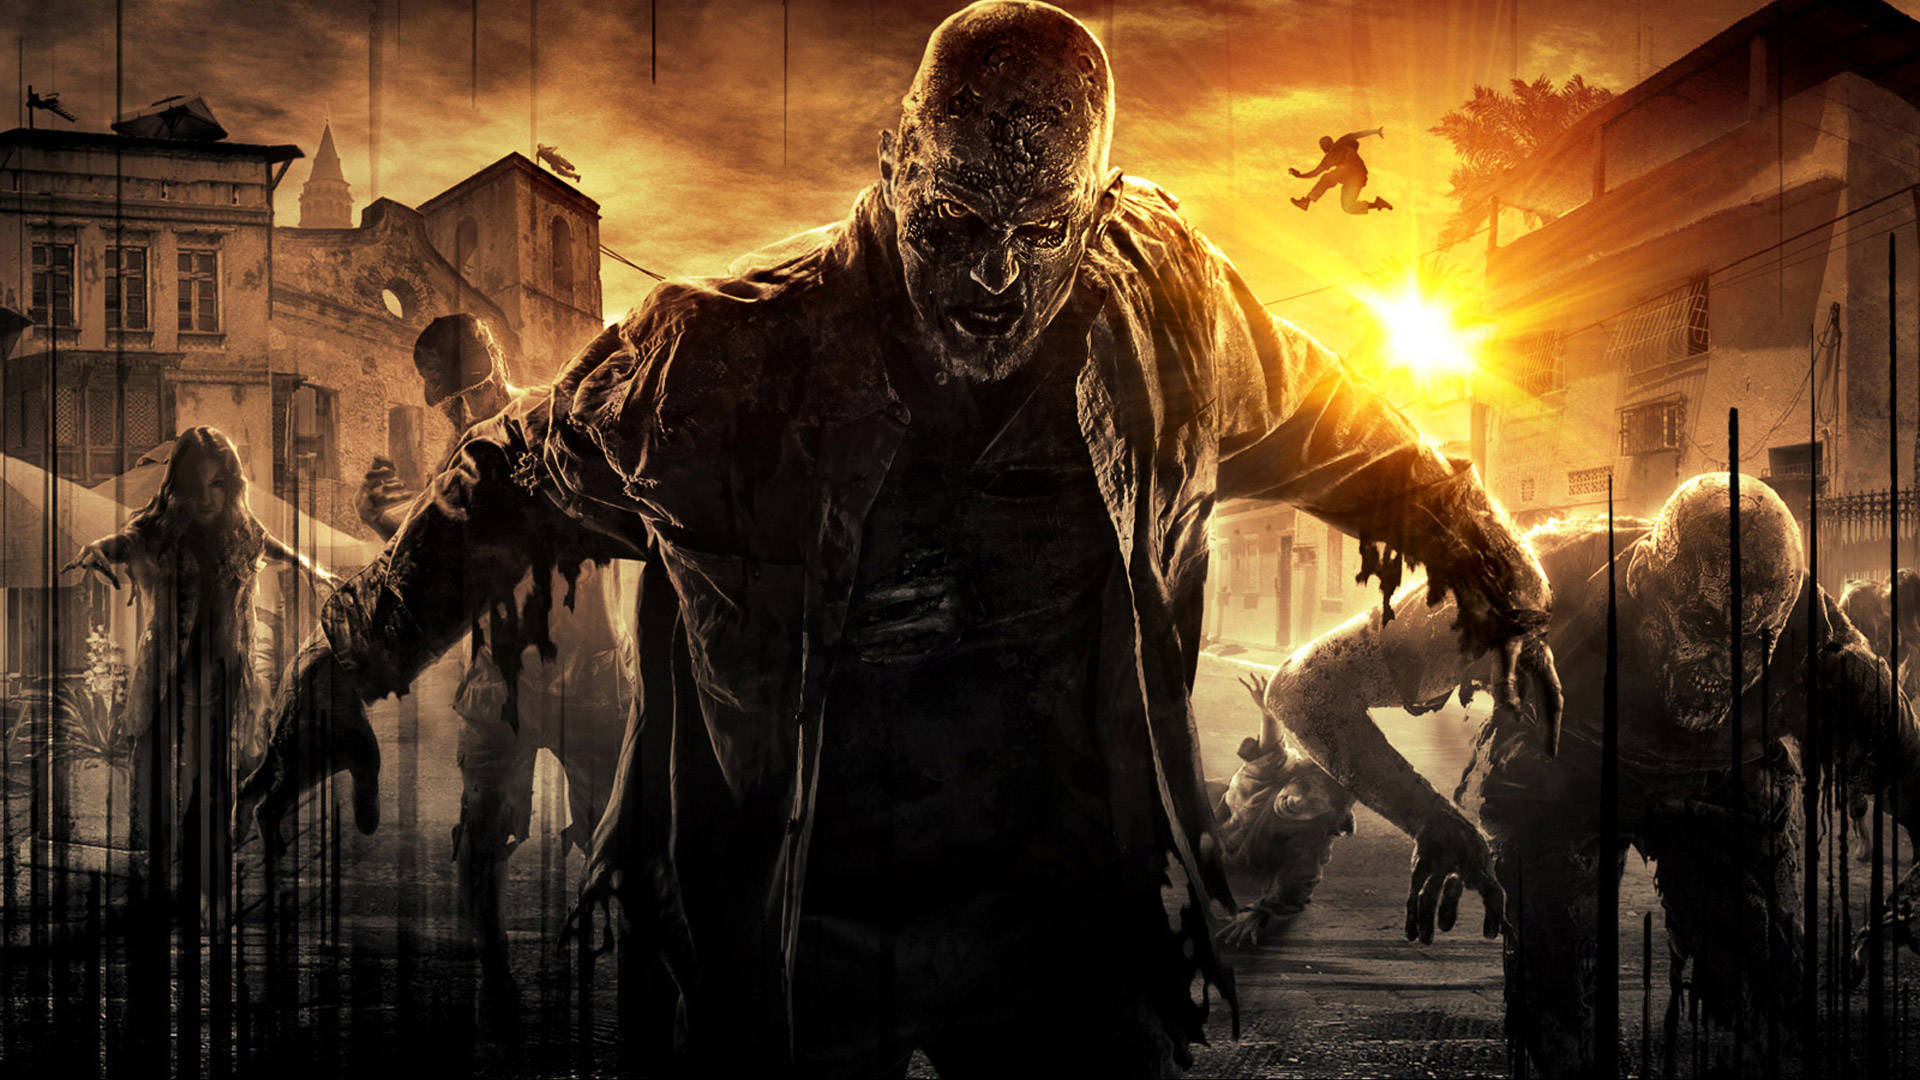 Zombies Walking In The Street With A Sun Setting Behind Them Wallpaper